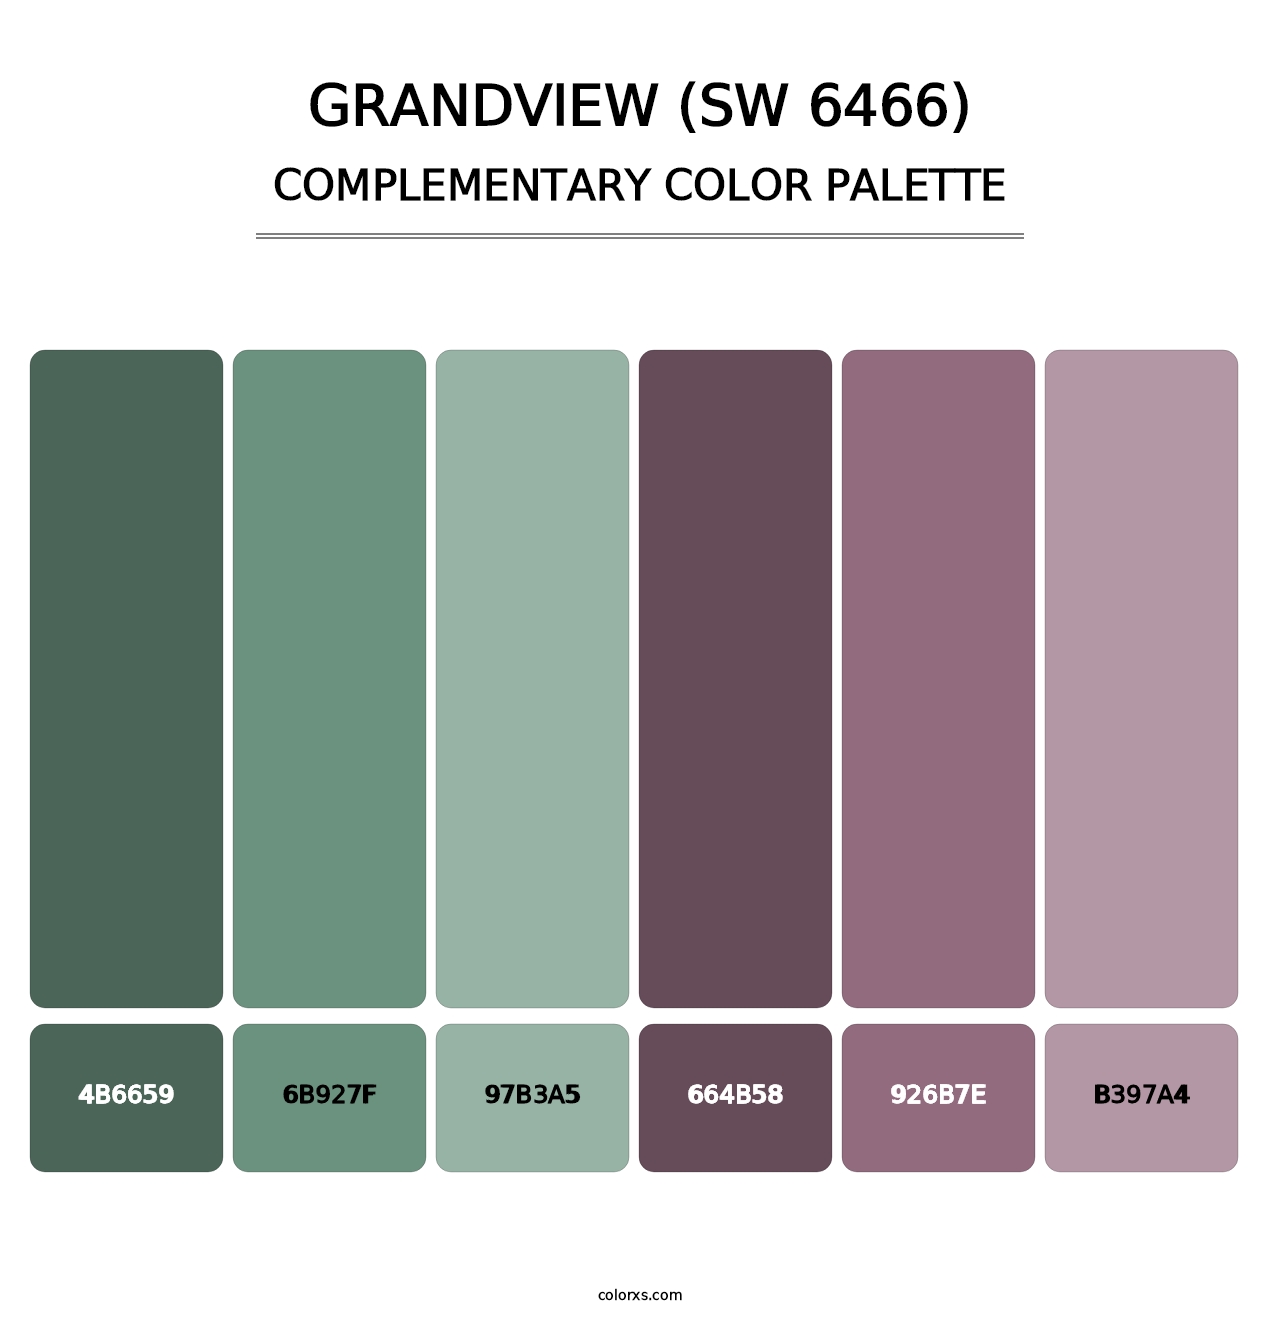 Grandview (SW 6466) - Complementary Color Palette